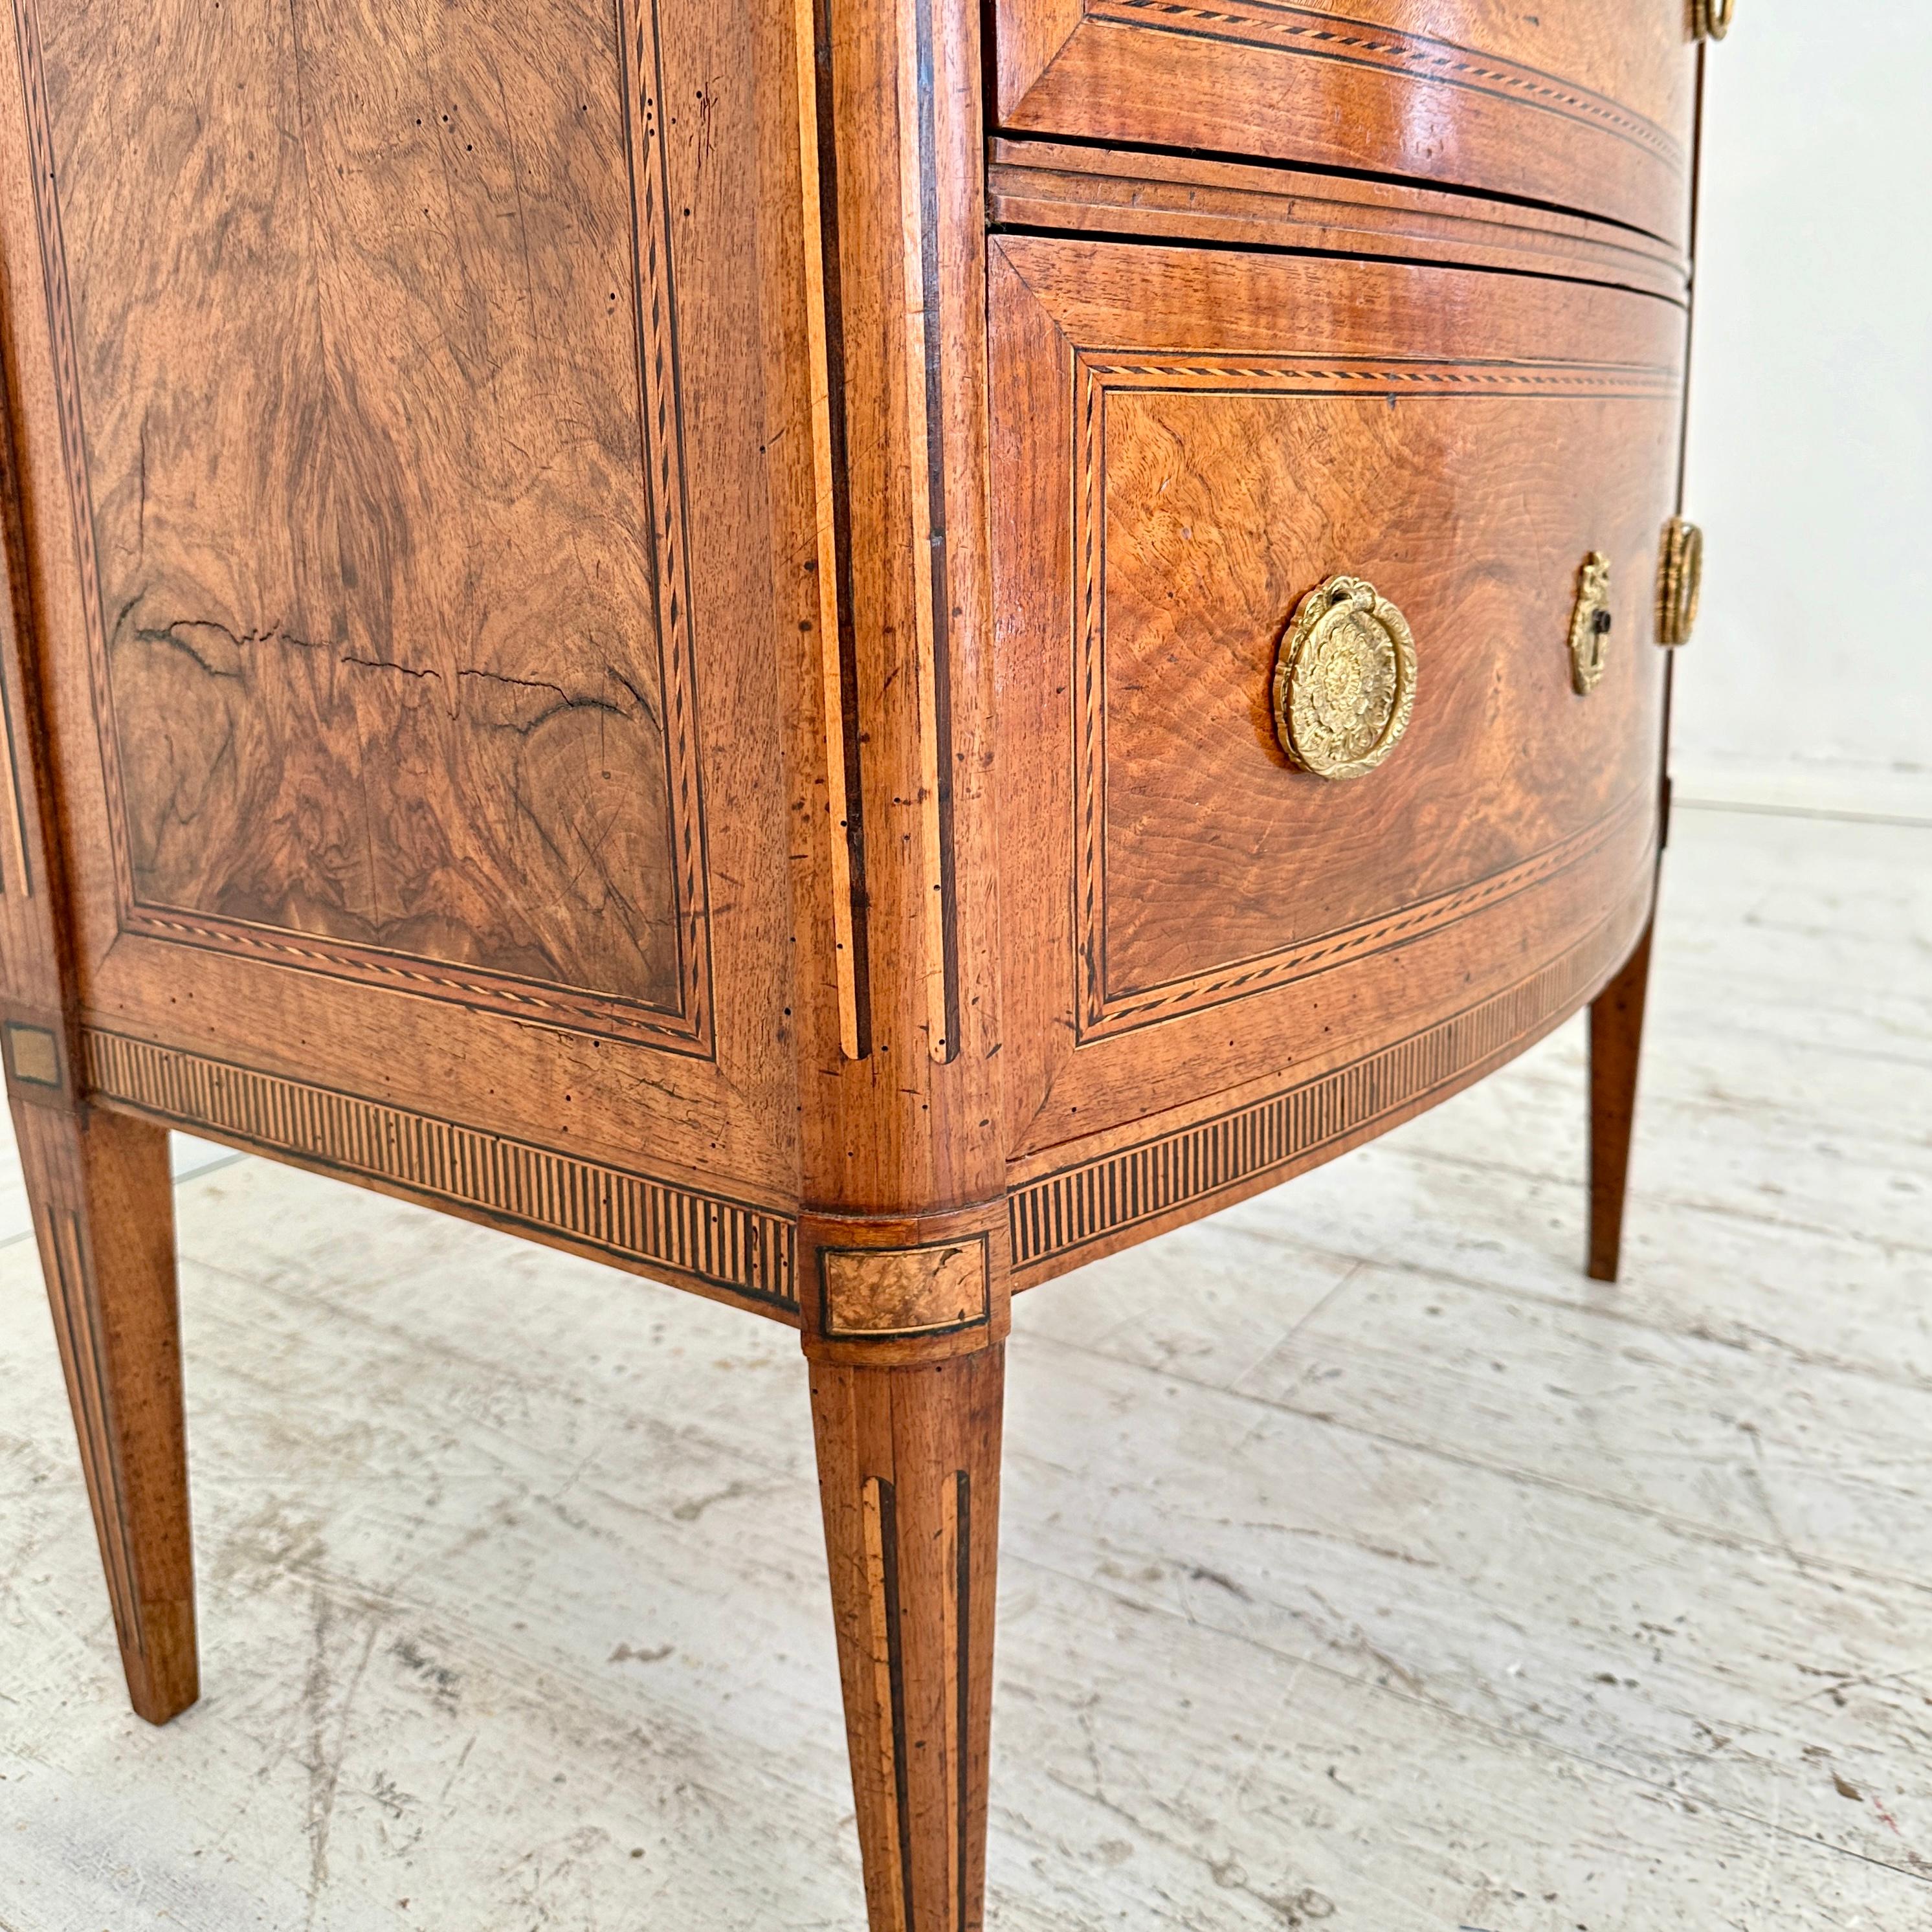 Small 18th Century German Louis Seize Commode in Walnut with 2 Drawers, 1790 For Sale 10